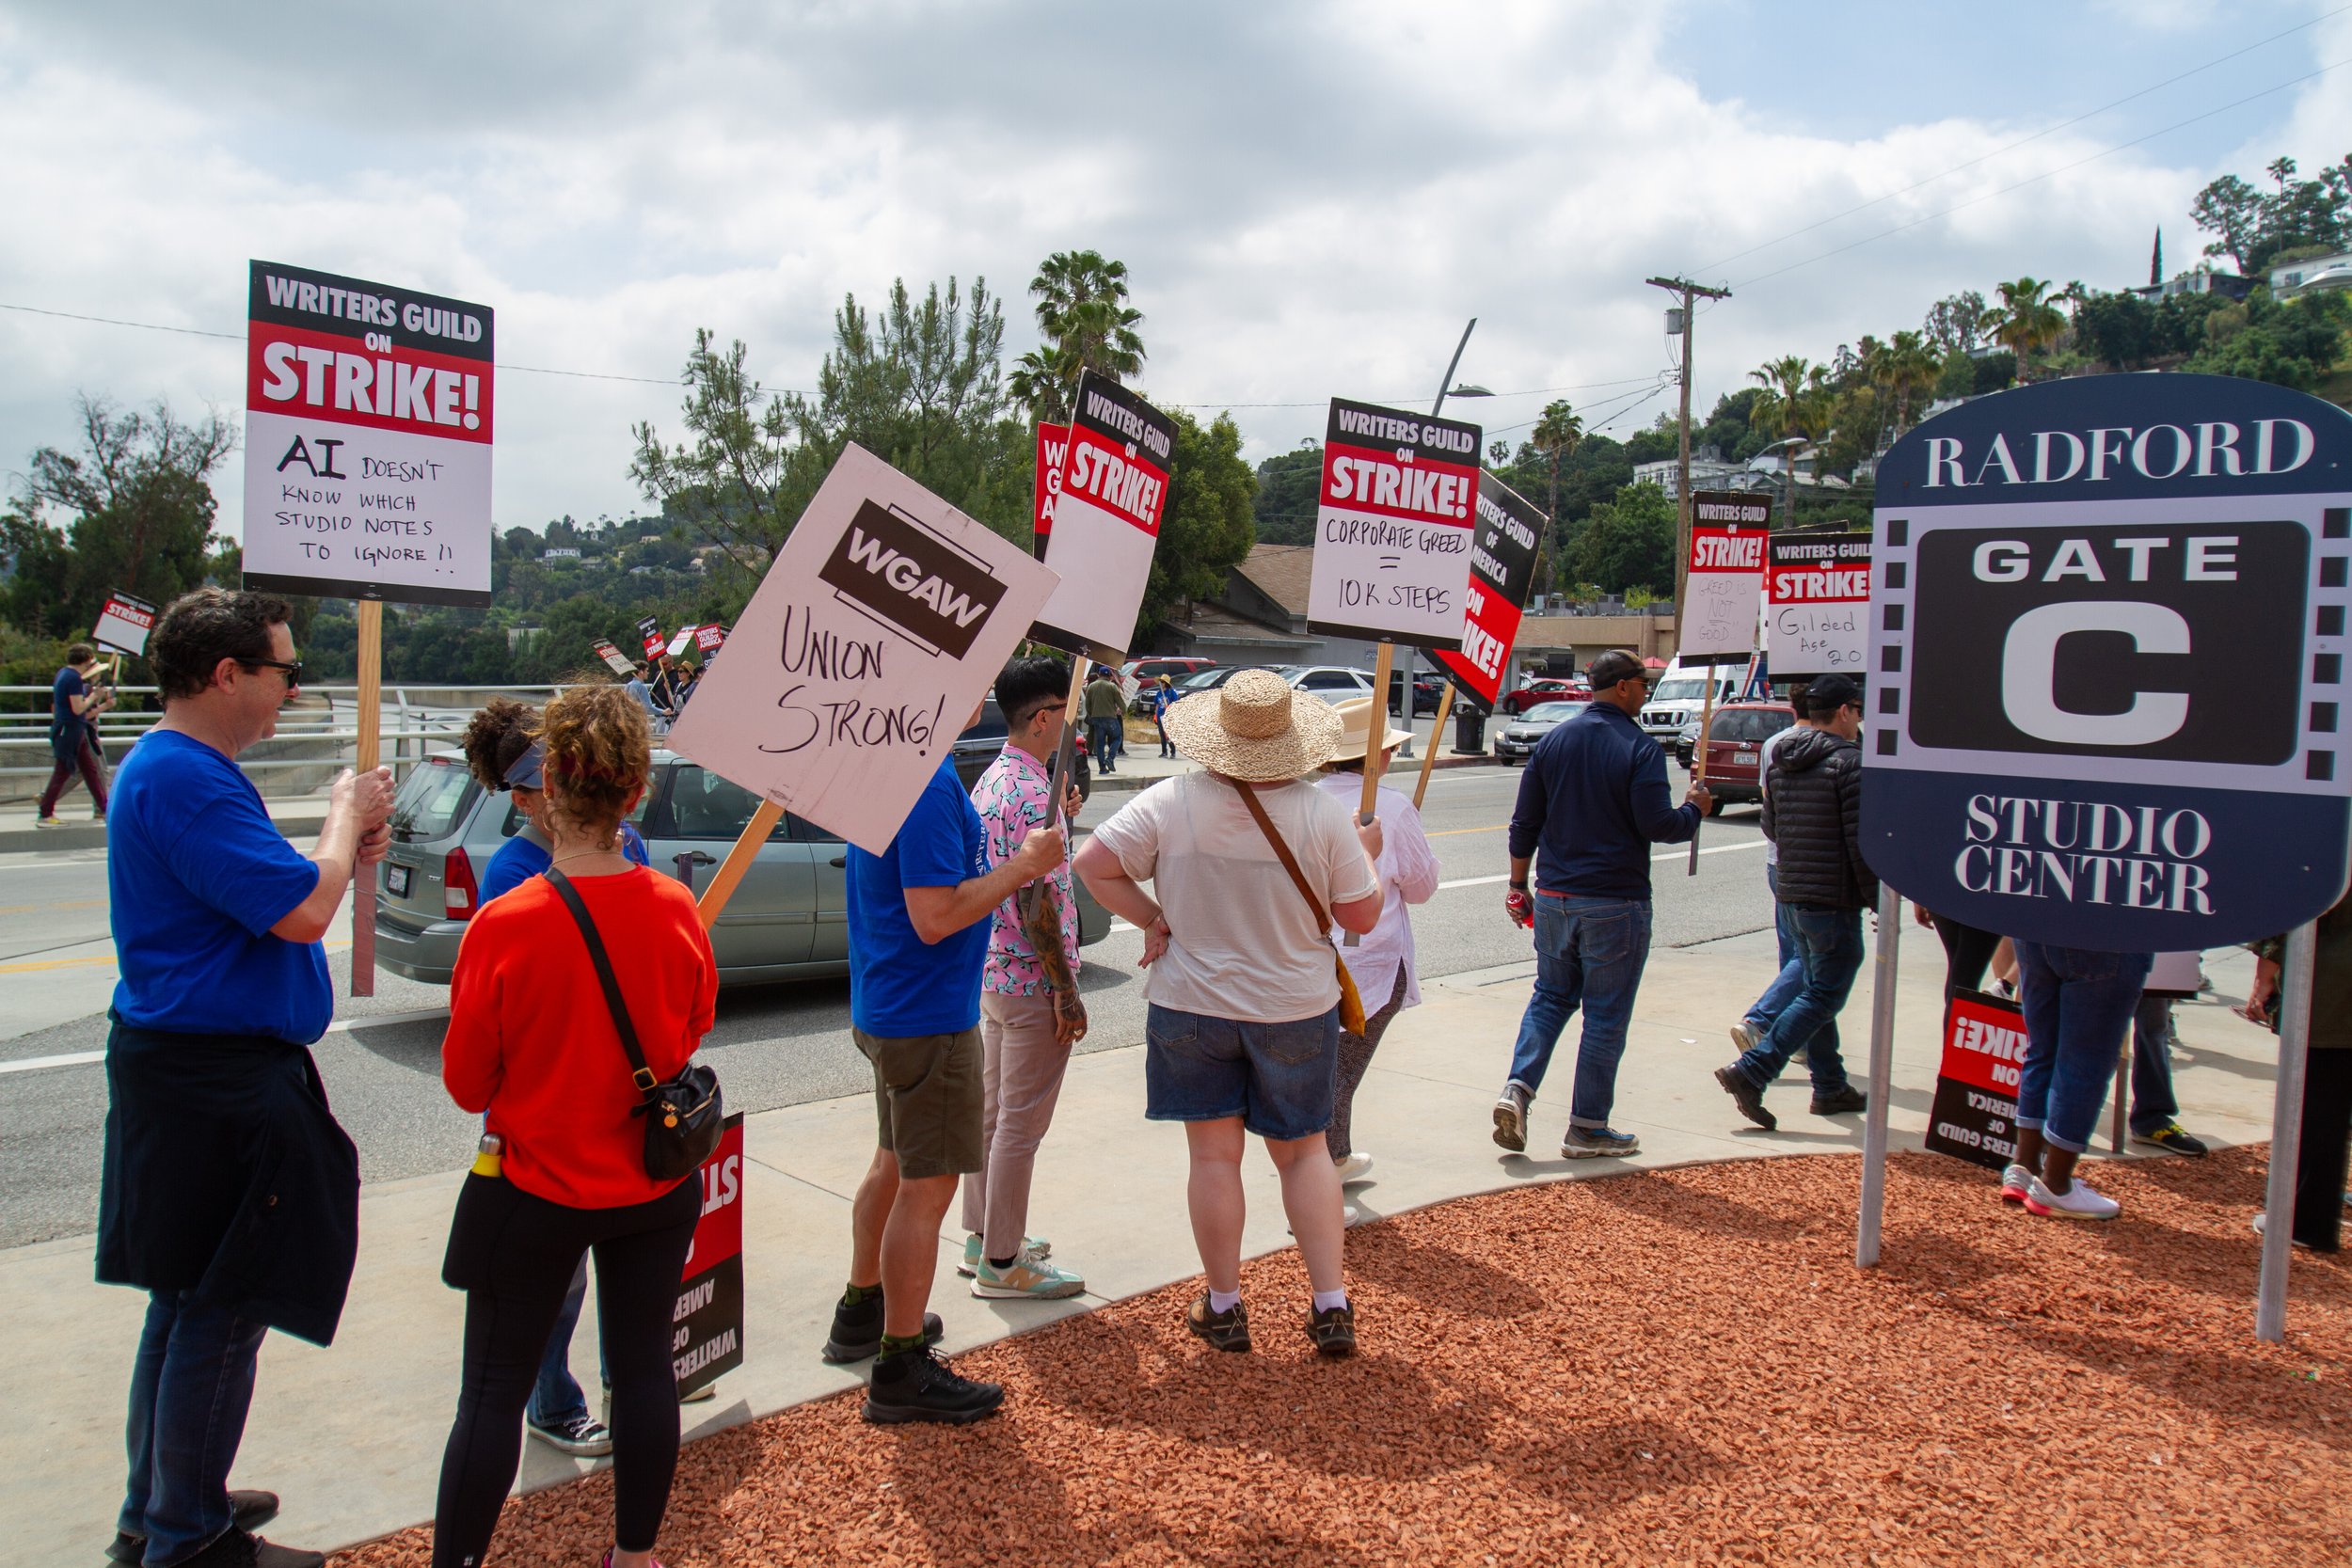  Writers Guild of America members picketing at Radford Studio Center on Thursday, May 11, 2023 in Studio City, Calif. The strike began after failed contract negotiations with the Alliance of Motion Picture and Television Producers. (Baleigh O'Brien |